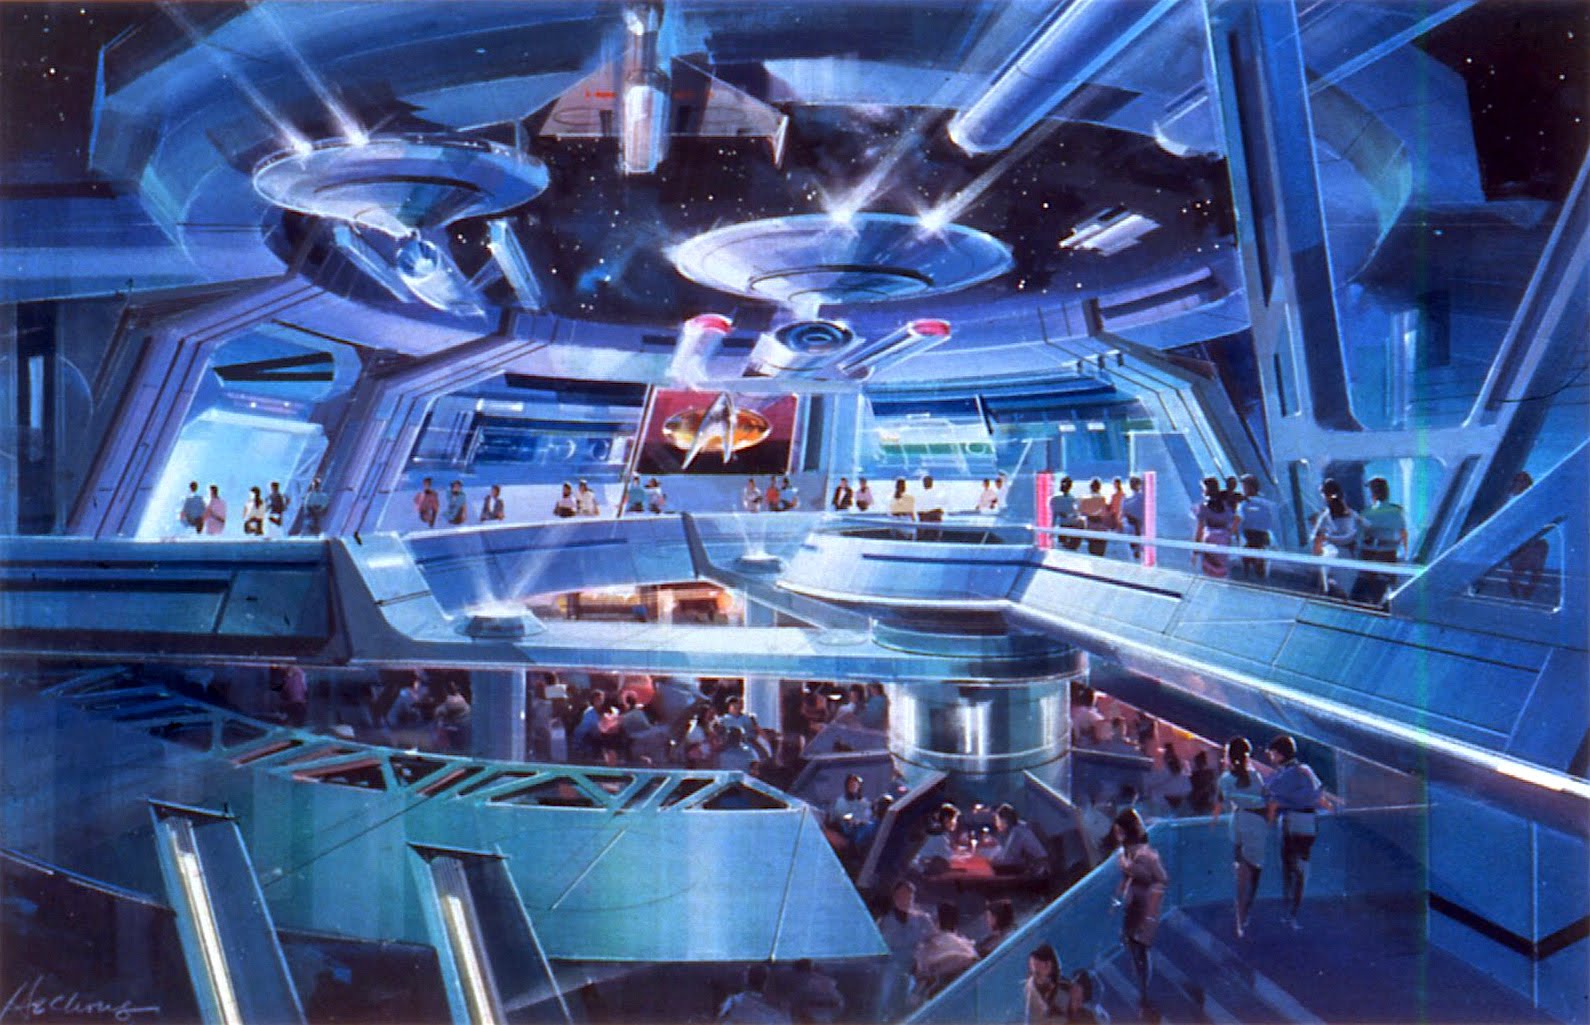 Disney And More: Did The Star Trek Experience Concept Inspired Wdi  Imagineers For Star Wars : Rise Of The Resistance Attraction ?